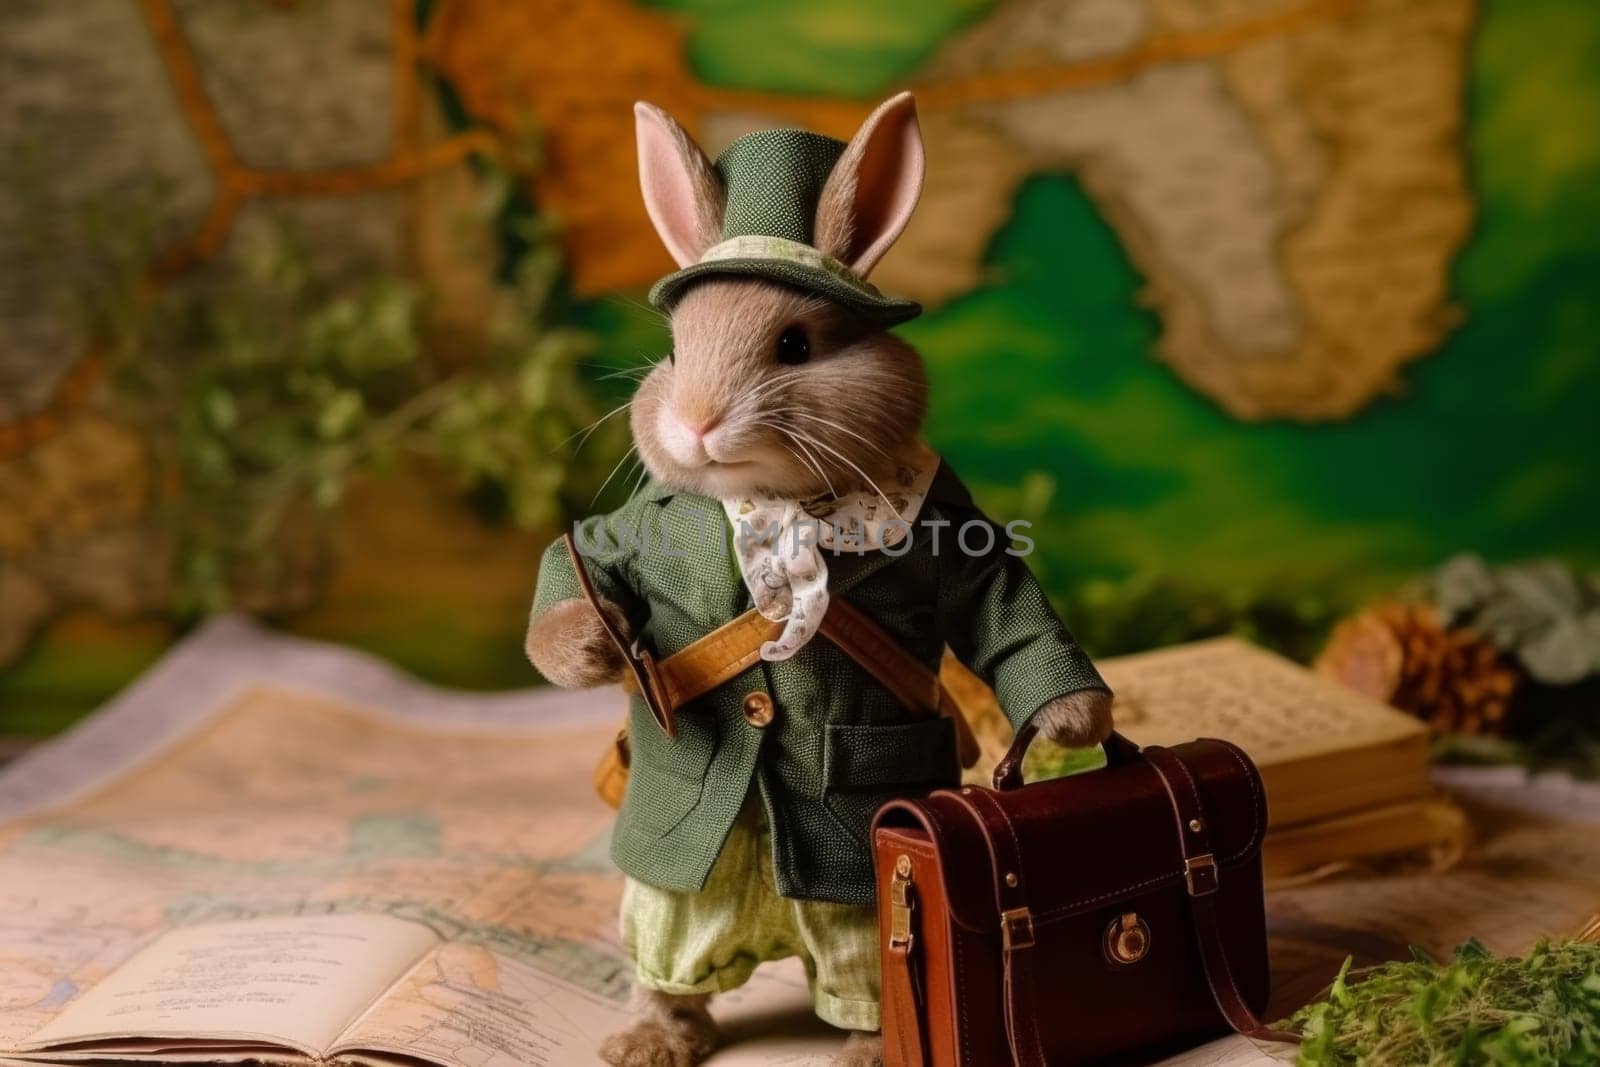 A sophisticated rabbit, ready for an adventure with a map and vintage suitcase, stands before a world map